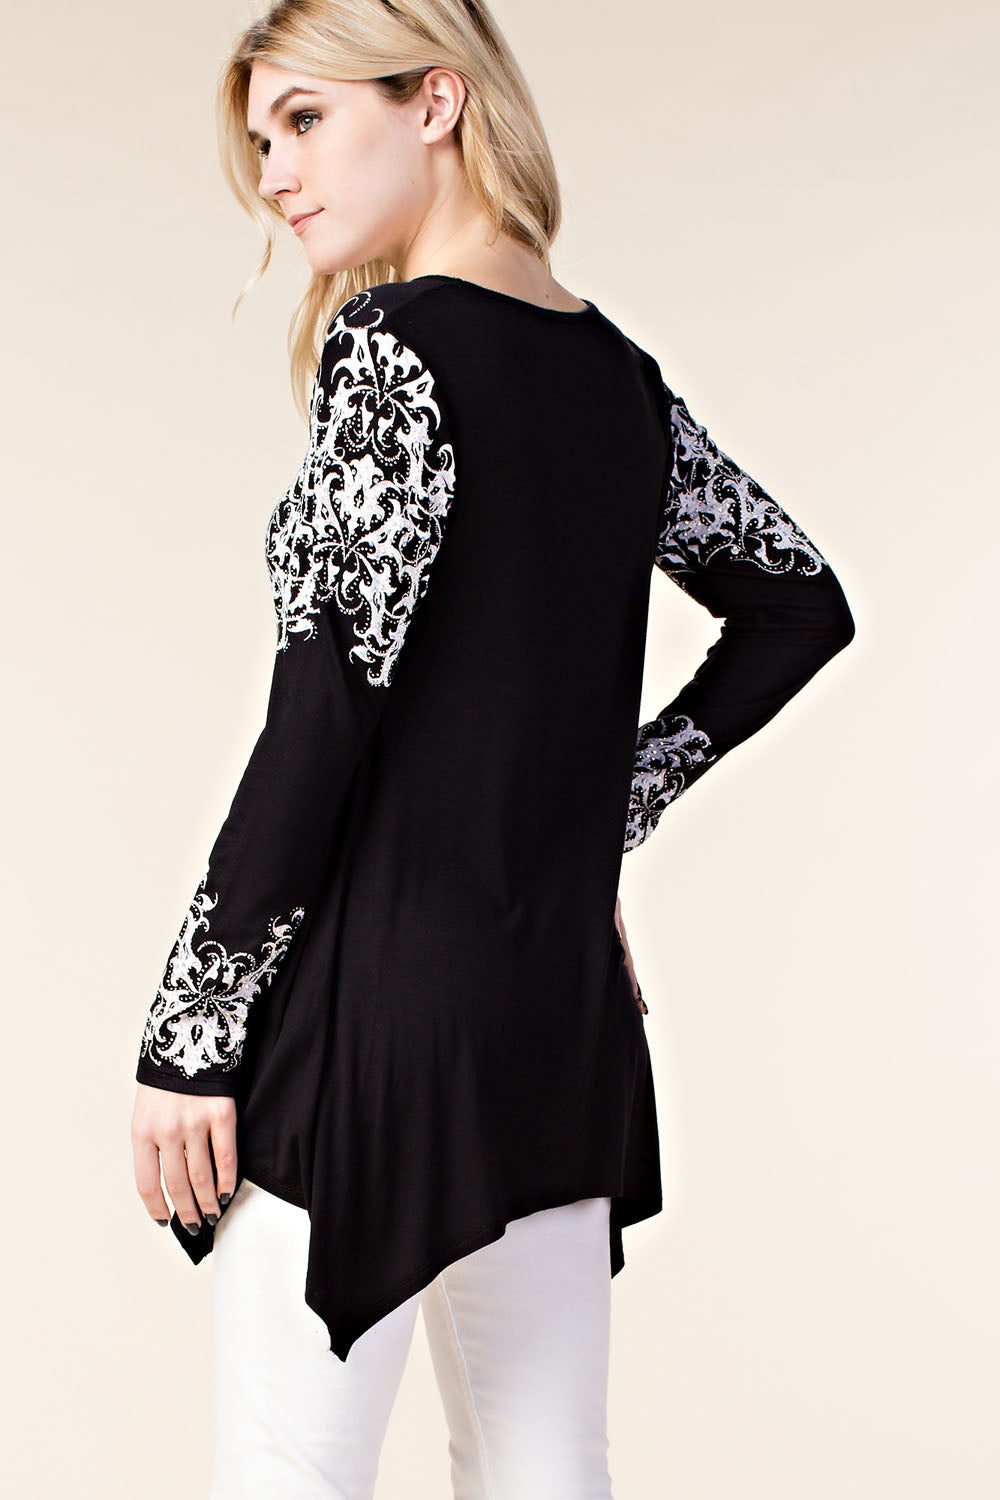 Women's Long sleeve with print and stones Graphic Print Black & White Tunic L/S Shirt Embellished in Rhinestones